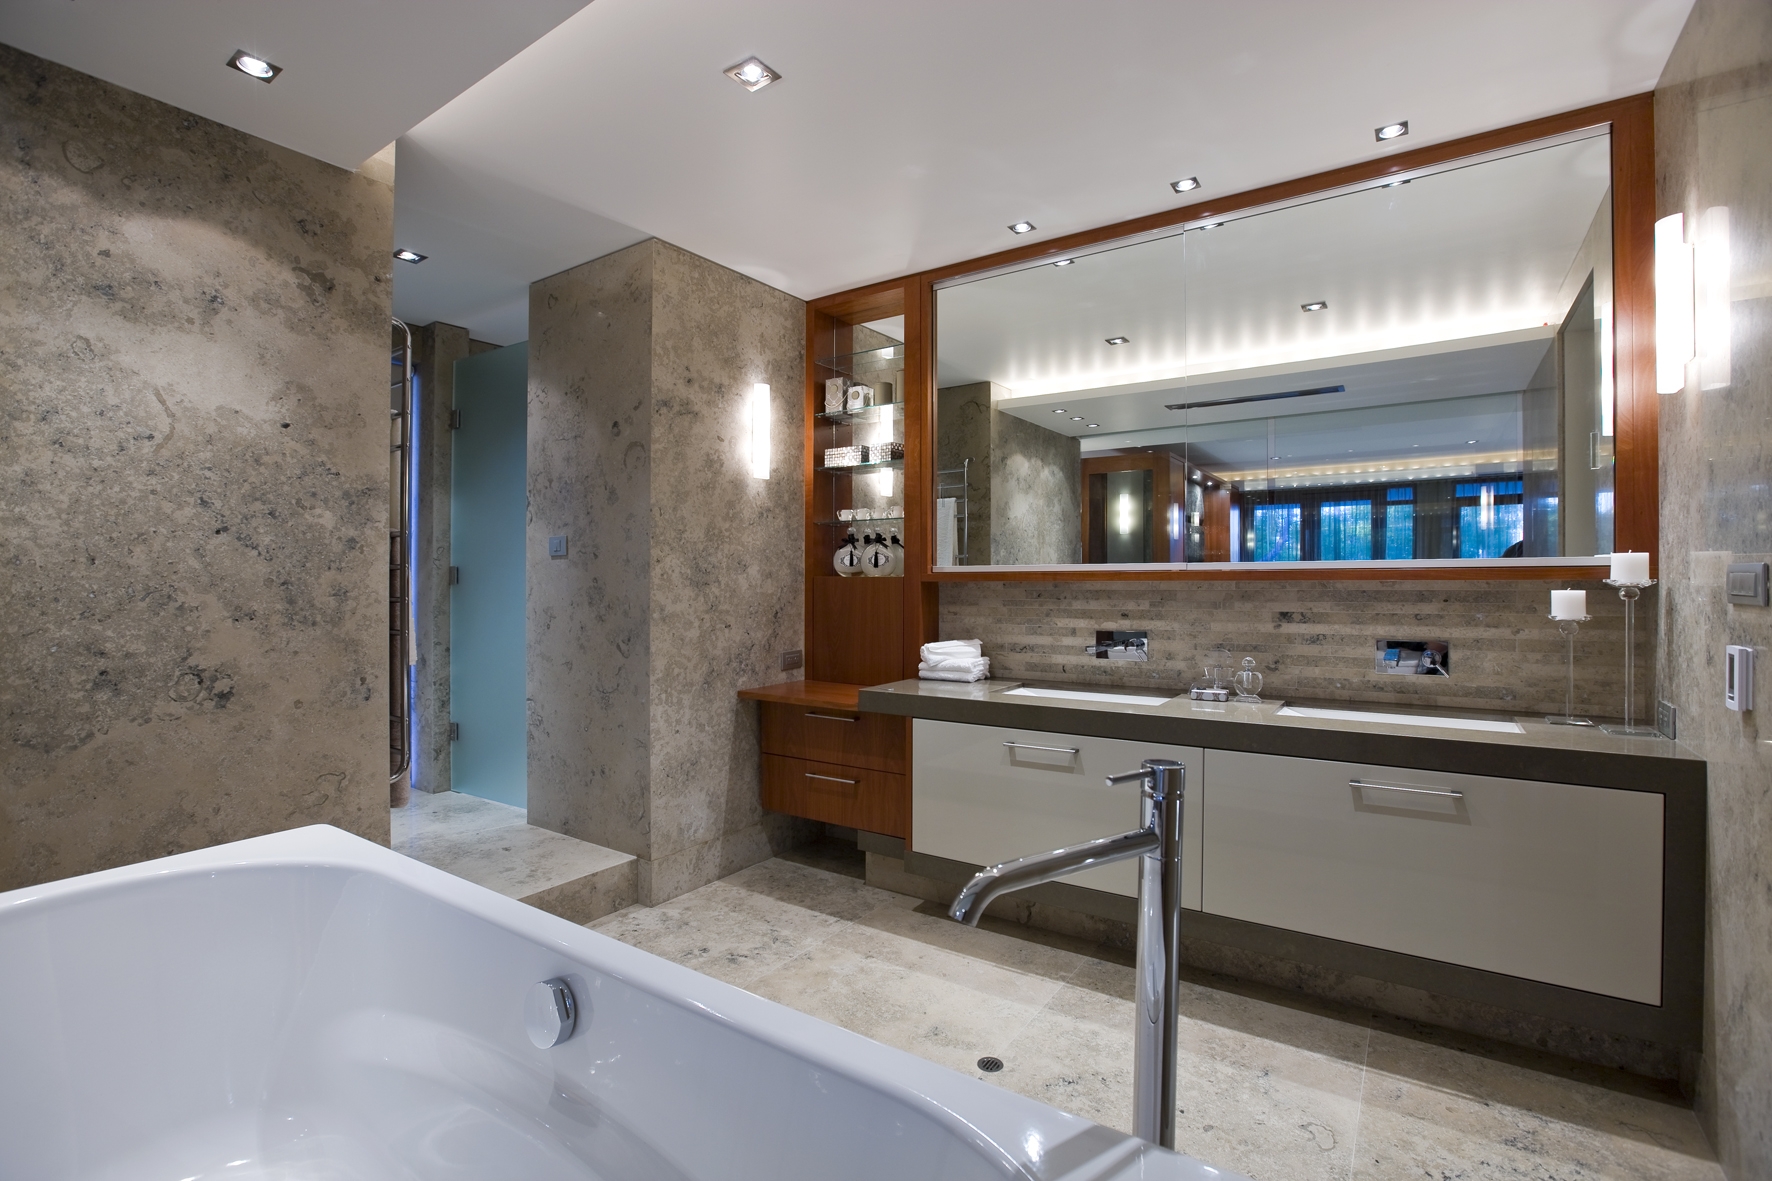 27 nice ideas and pictures of natural stone bathroom wall tiles